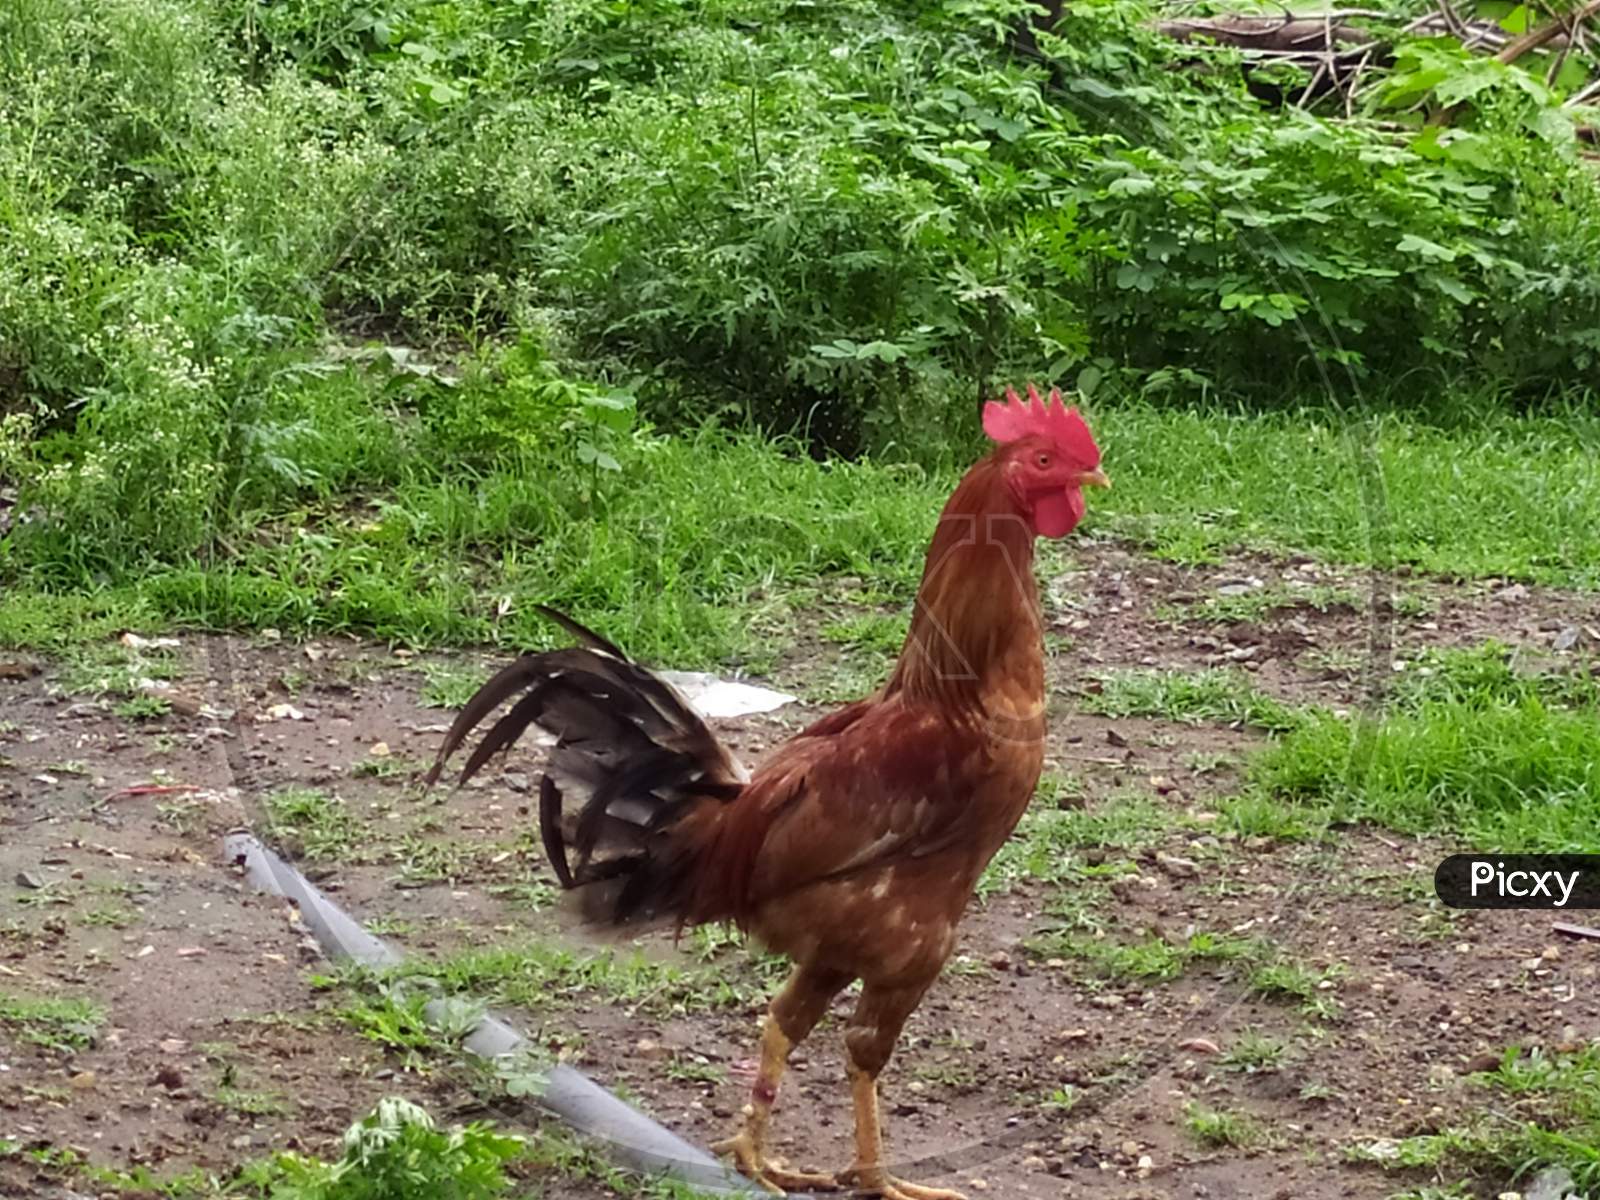 Wild and feral chicken rooster in Nagpur, India